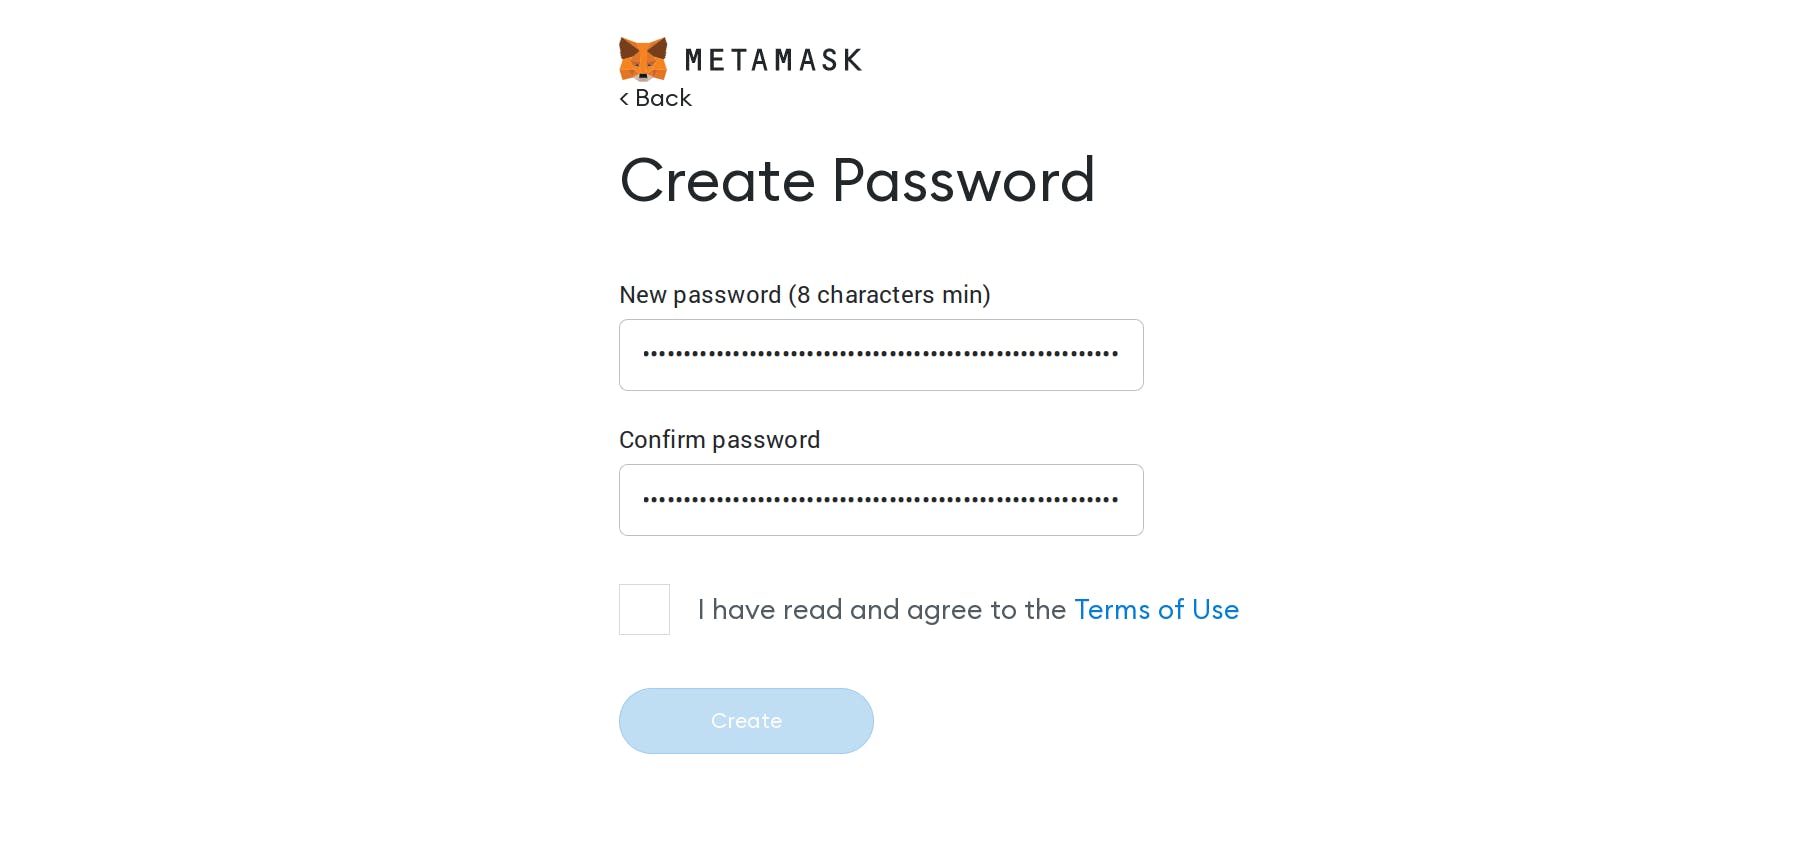 This image shows the password creation step for the MetaMask wallet